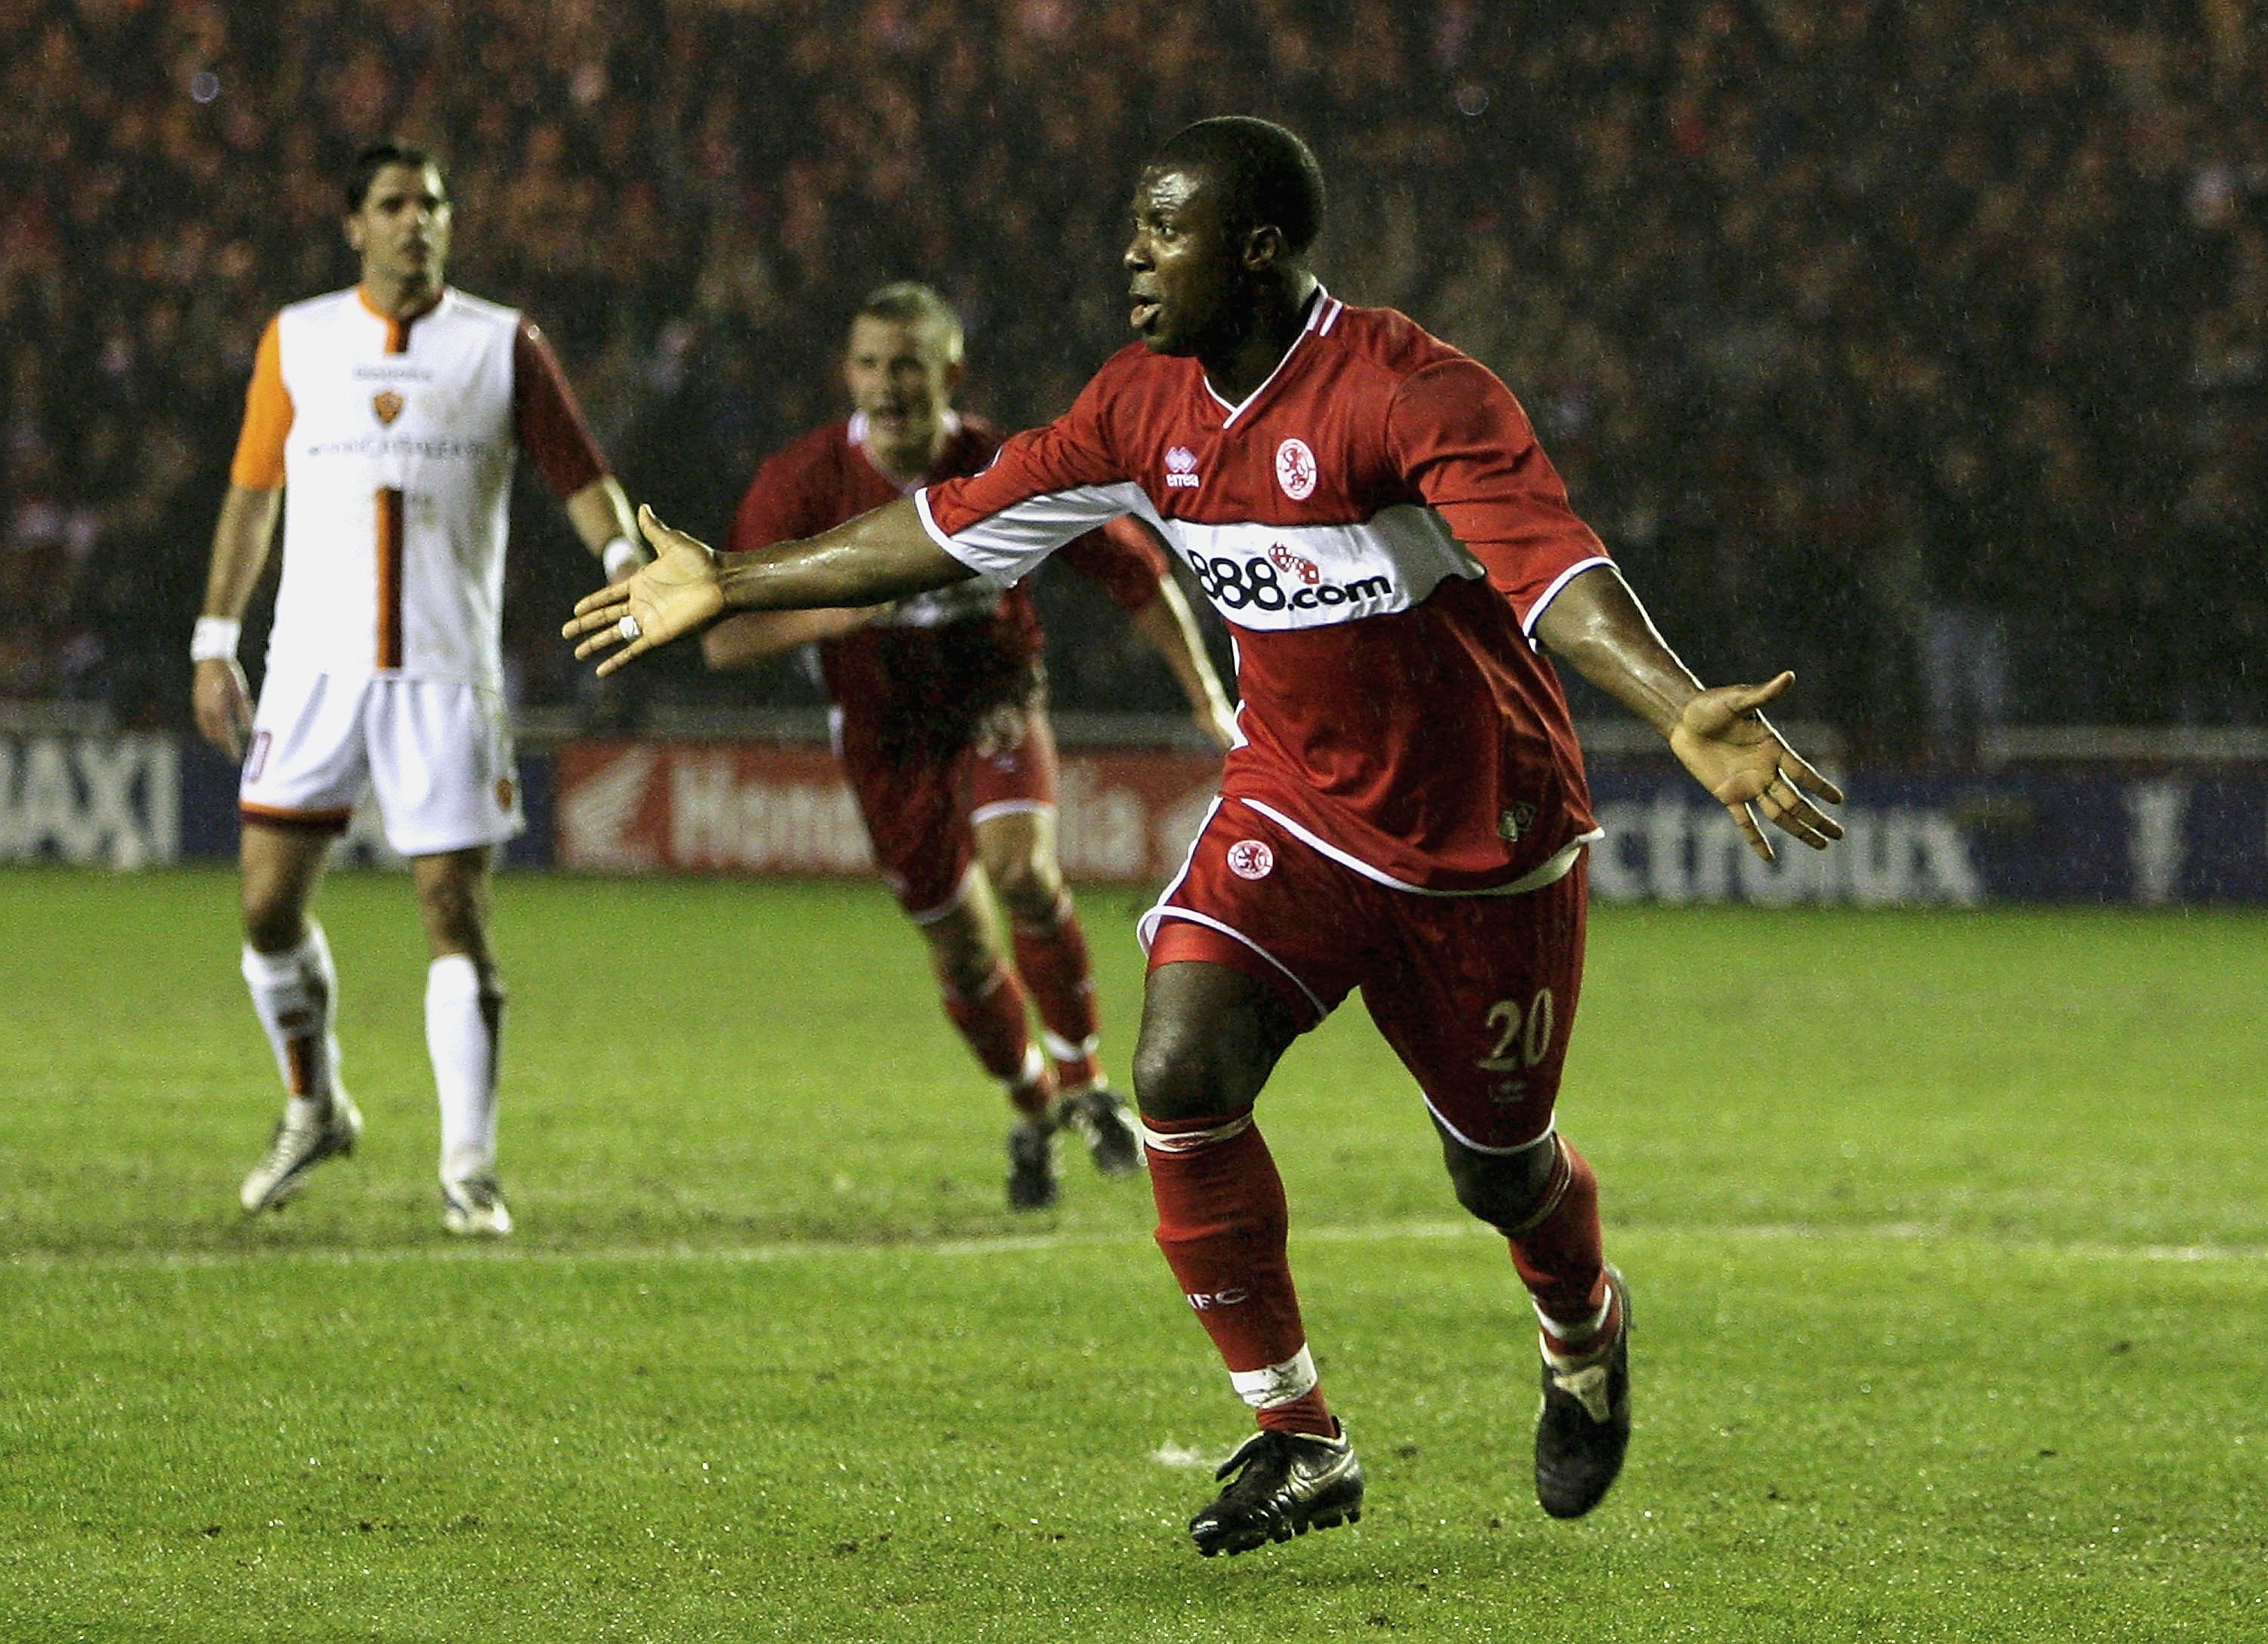 MIDDLESBROUGH, ENGLAND - MARCH 9:  Yakubu of Middlesbrough celebrates his goal during the UEFA Cup Round of 16, First Leg match between Middlesbrough and AS Roma at the Riverside Stadium on March 9, 2006 in Middlesbrough, England. (Photo by Matthew Lewis/